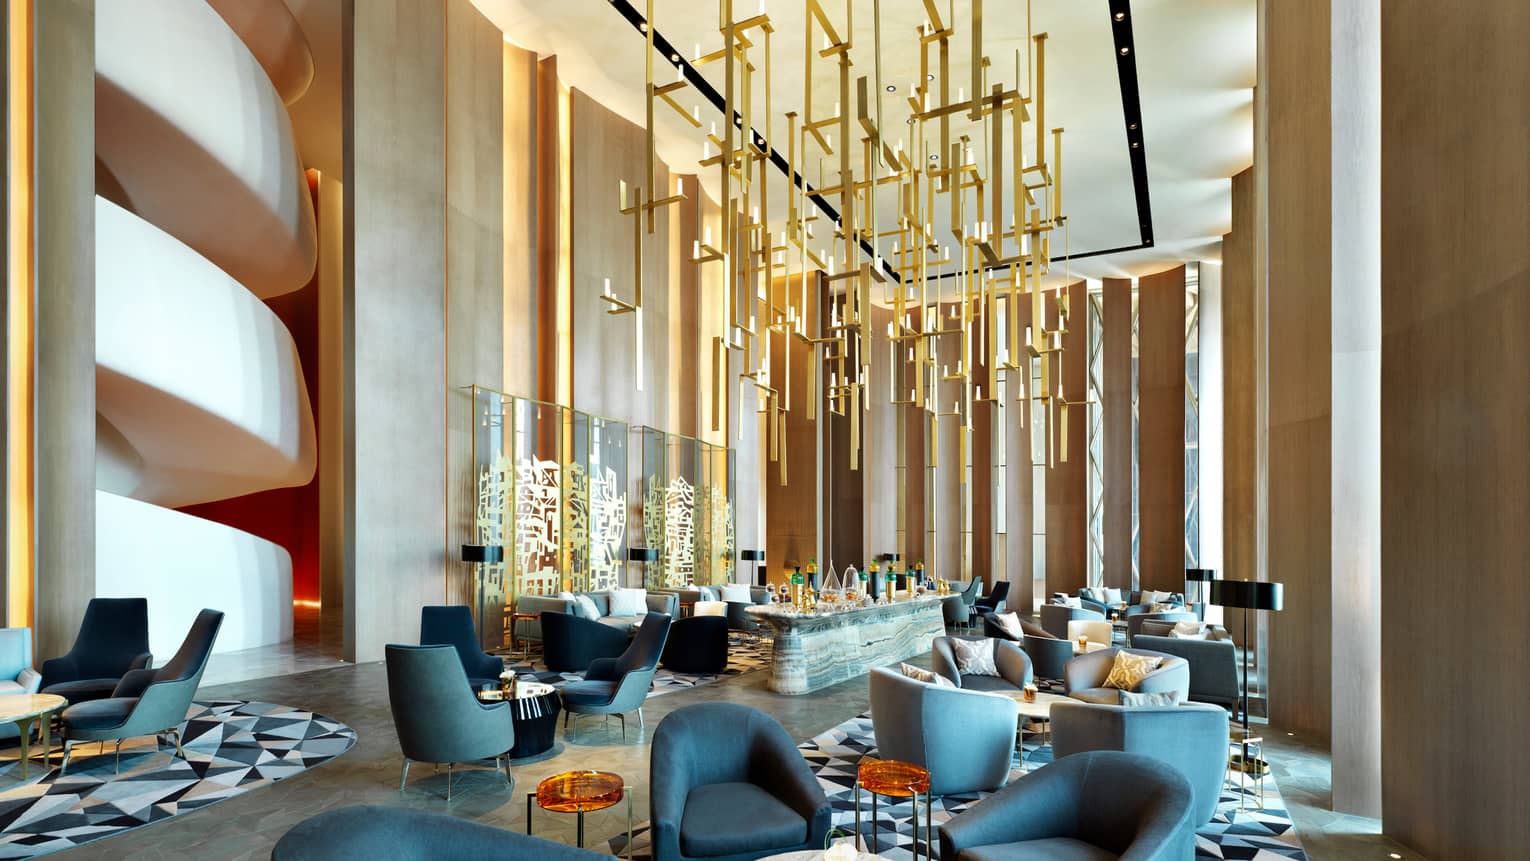 Modern dining chairs, tables in lounge with soaring ceilings, gold sculptures hanging from ceiling, wall